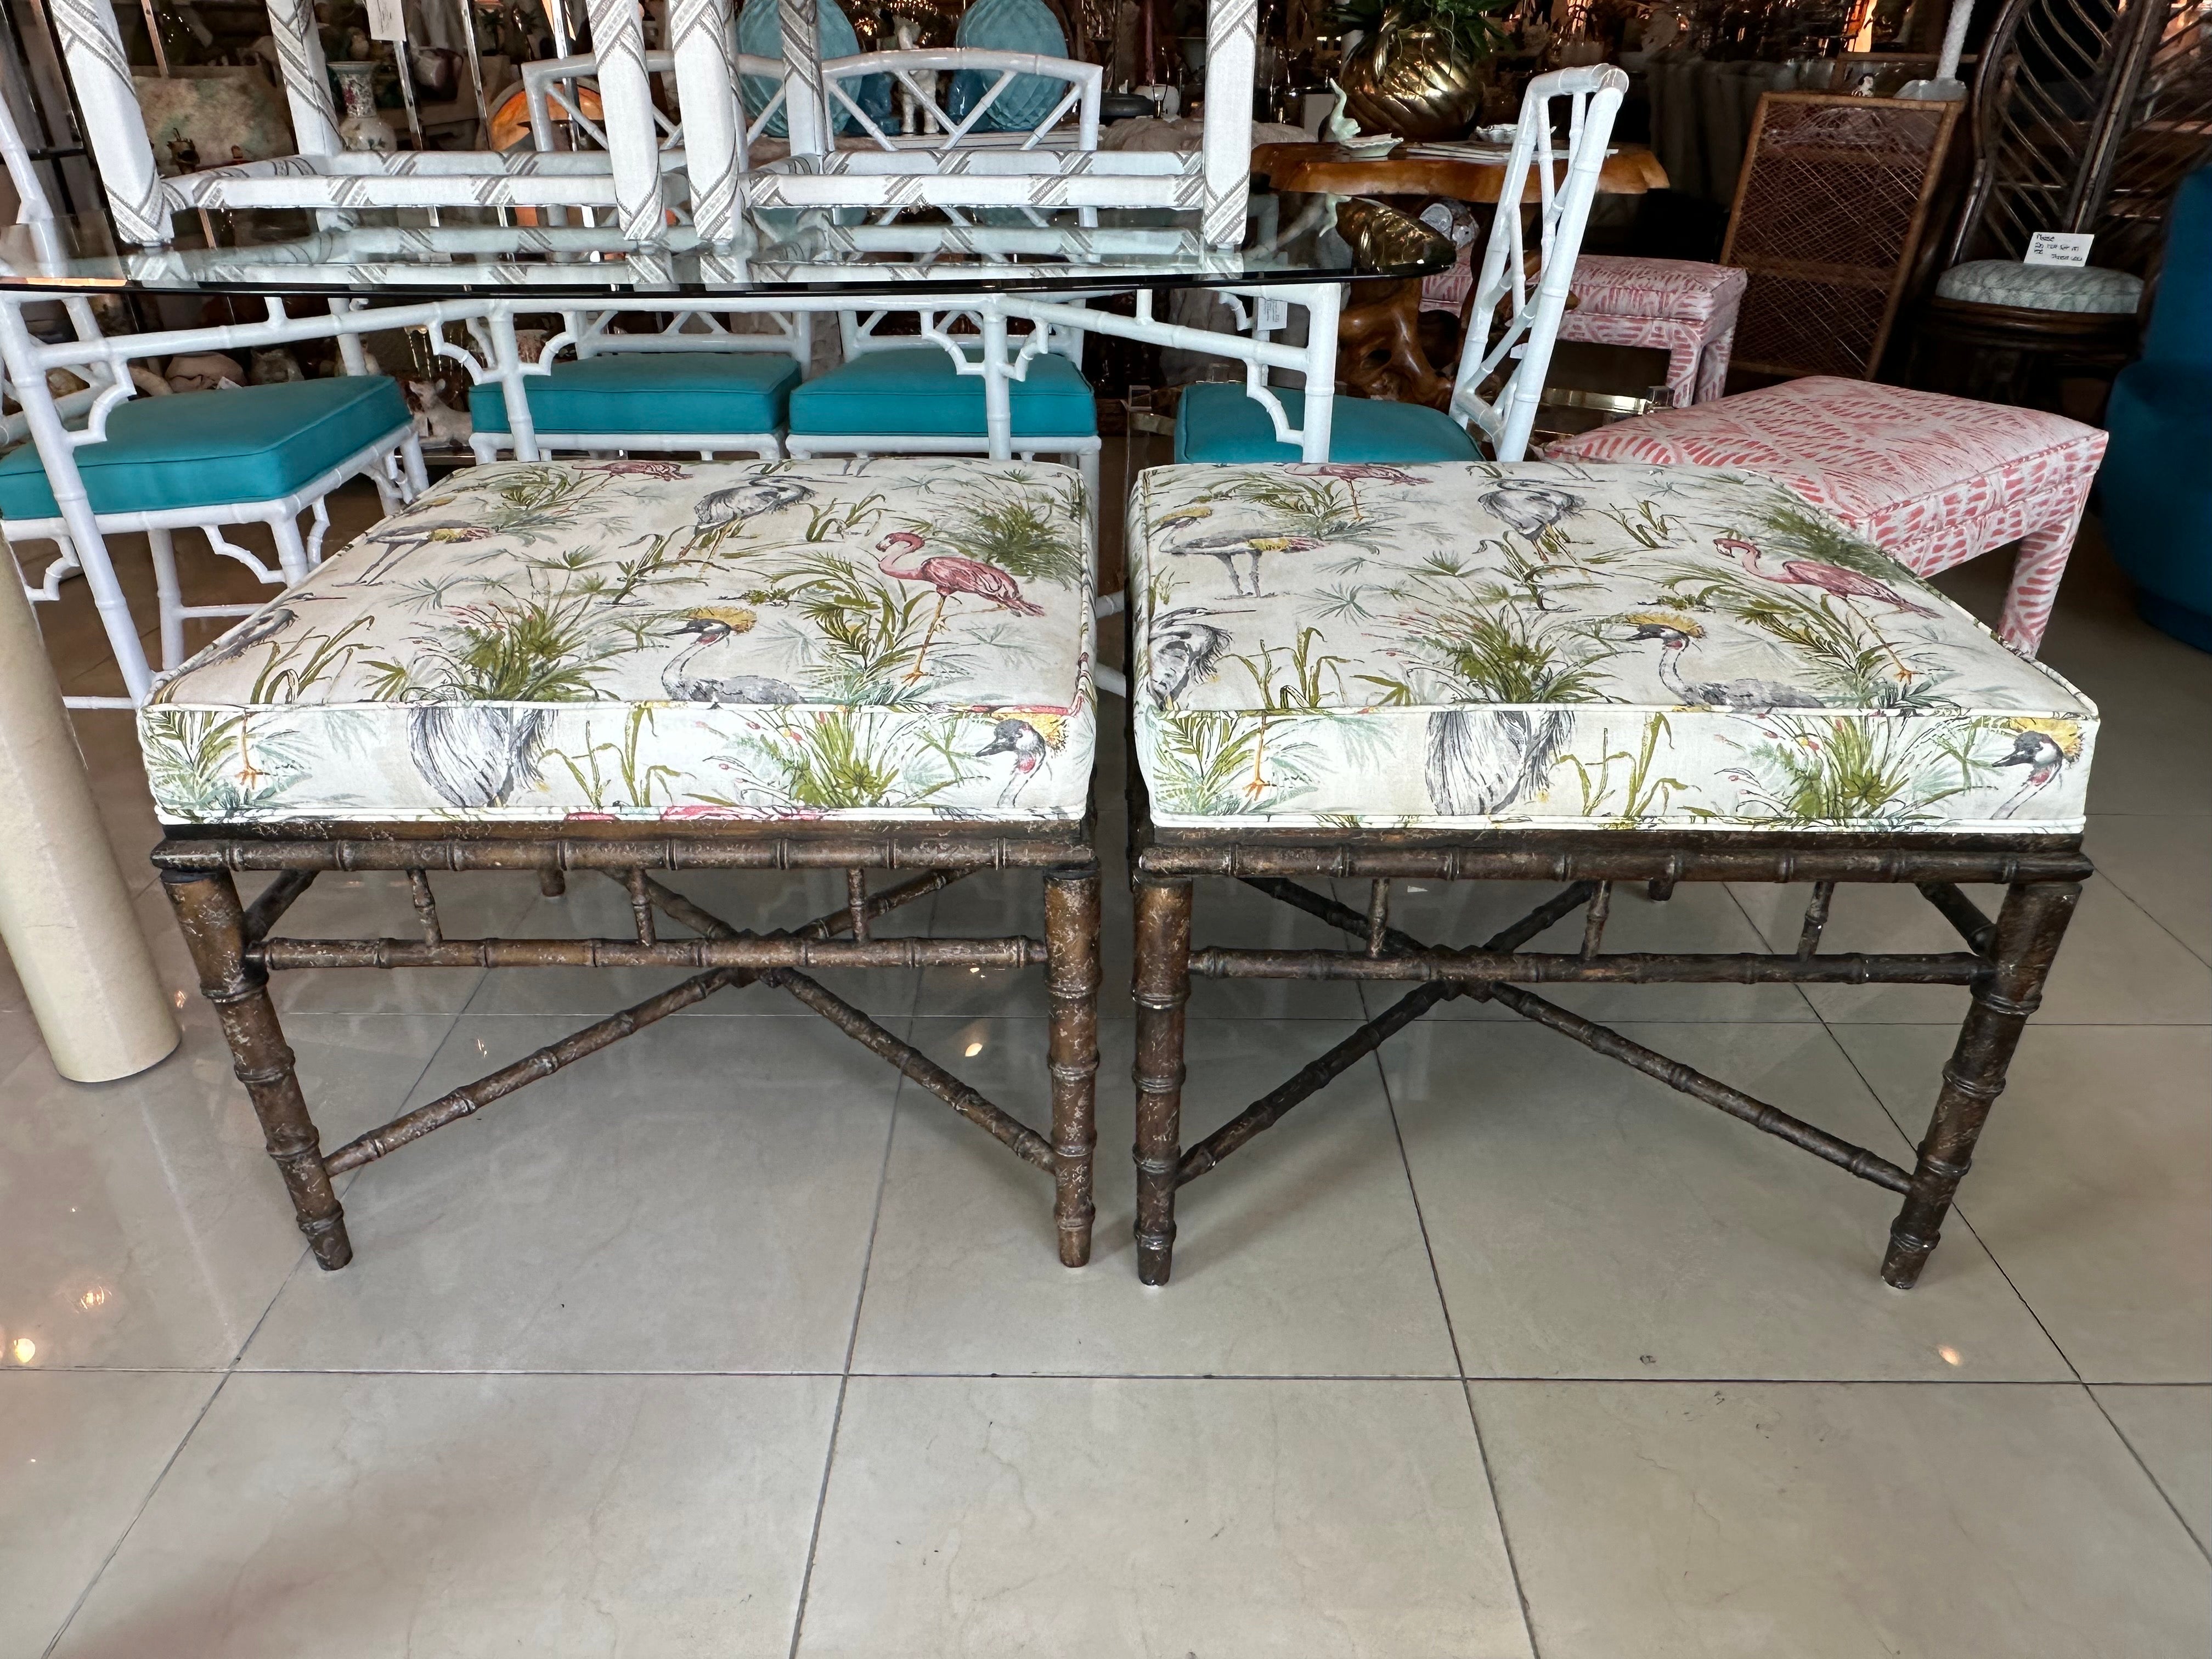 Lovely pair of vintage faux bamboo ottomans, benches, stools. Newly upholstered in a bird fabric. Original wood finish. No damage or defects. Dimensions: 21.5 H x 27.5 W x 27.5 D.